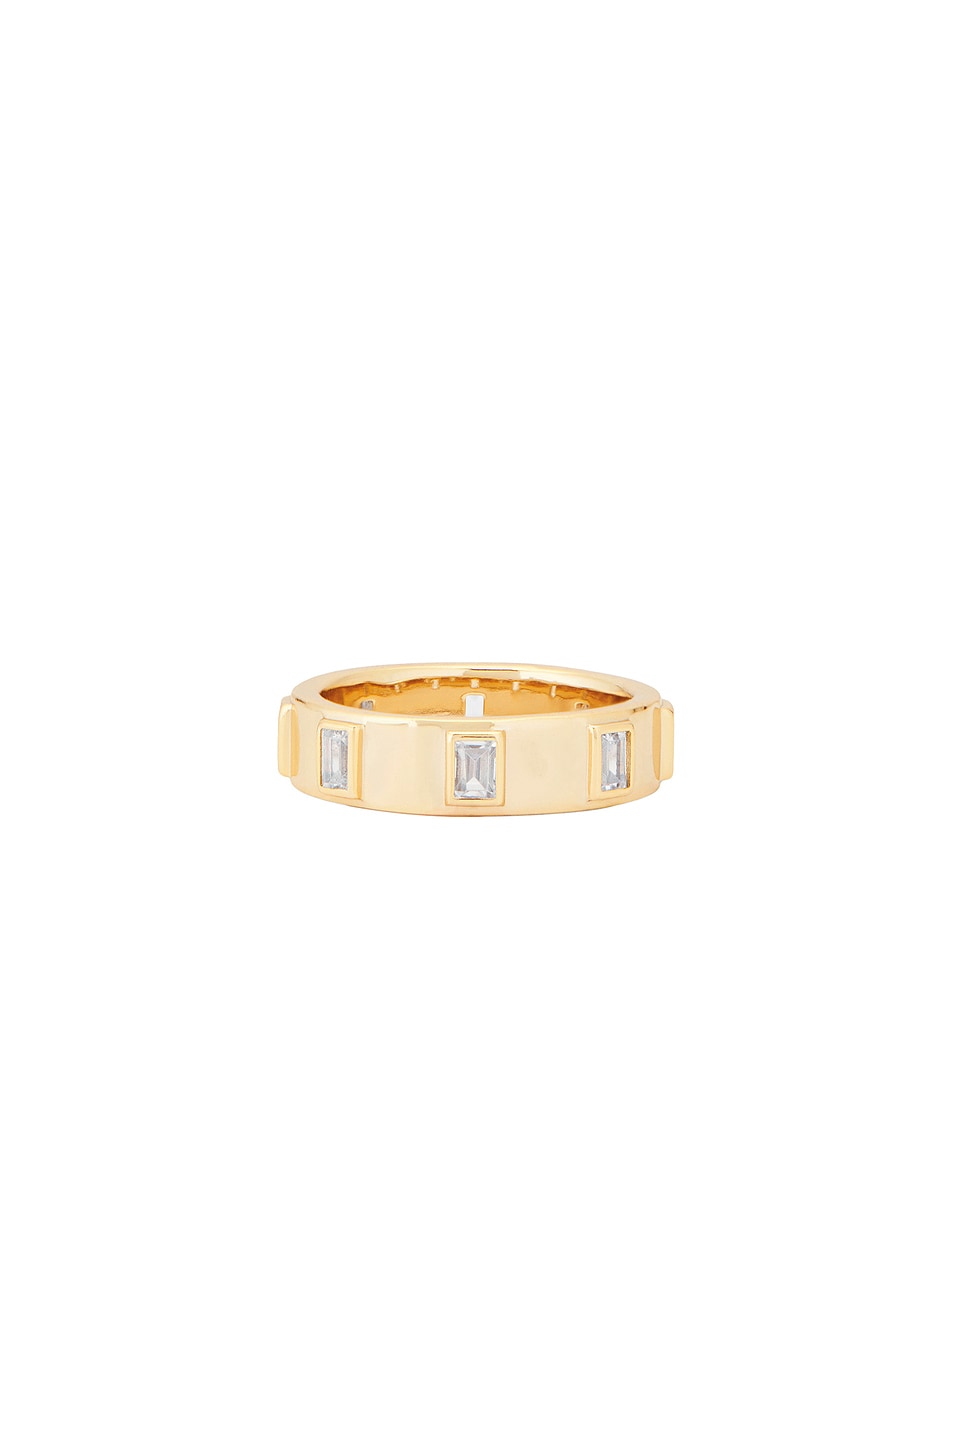 Image 1 of MEGA Chambers Ring in 14k Yellow Gold Plated